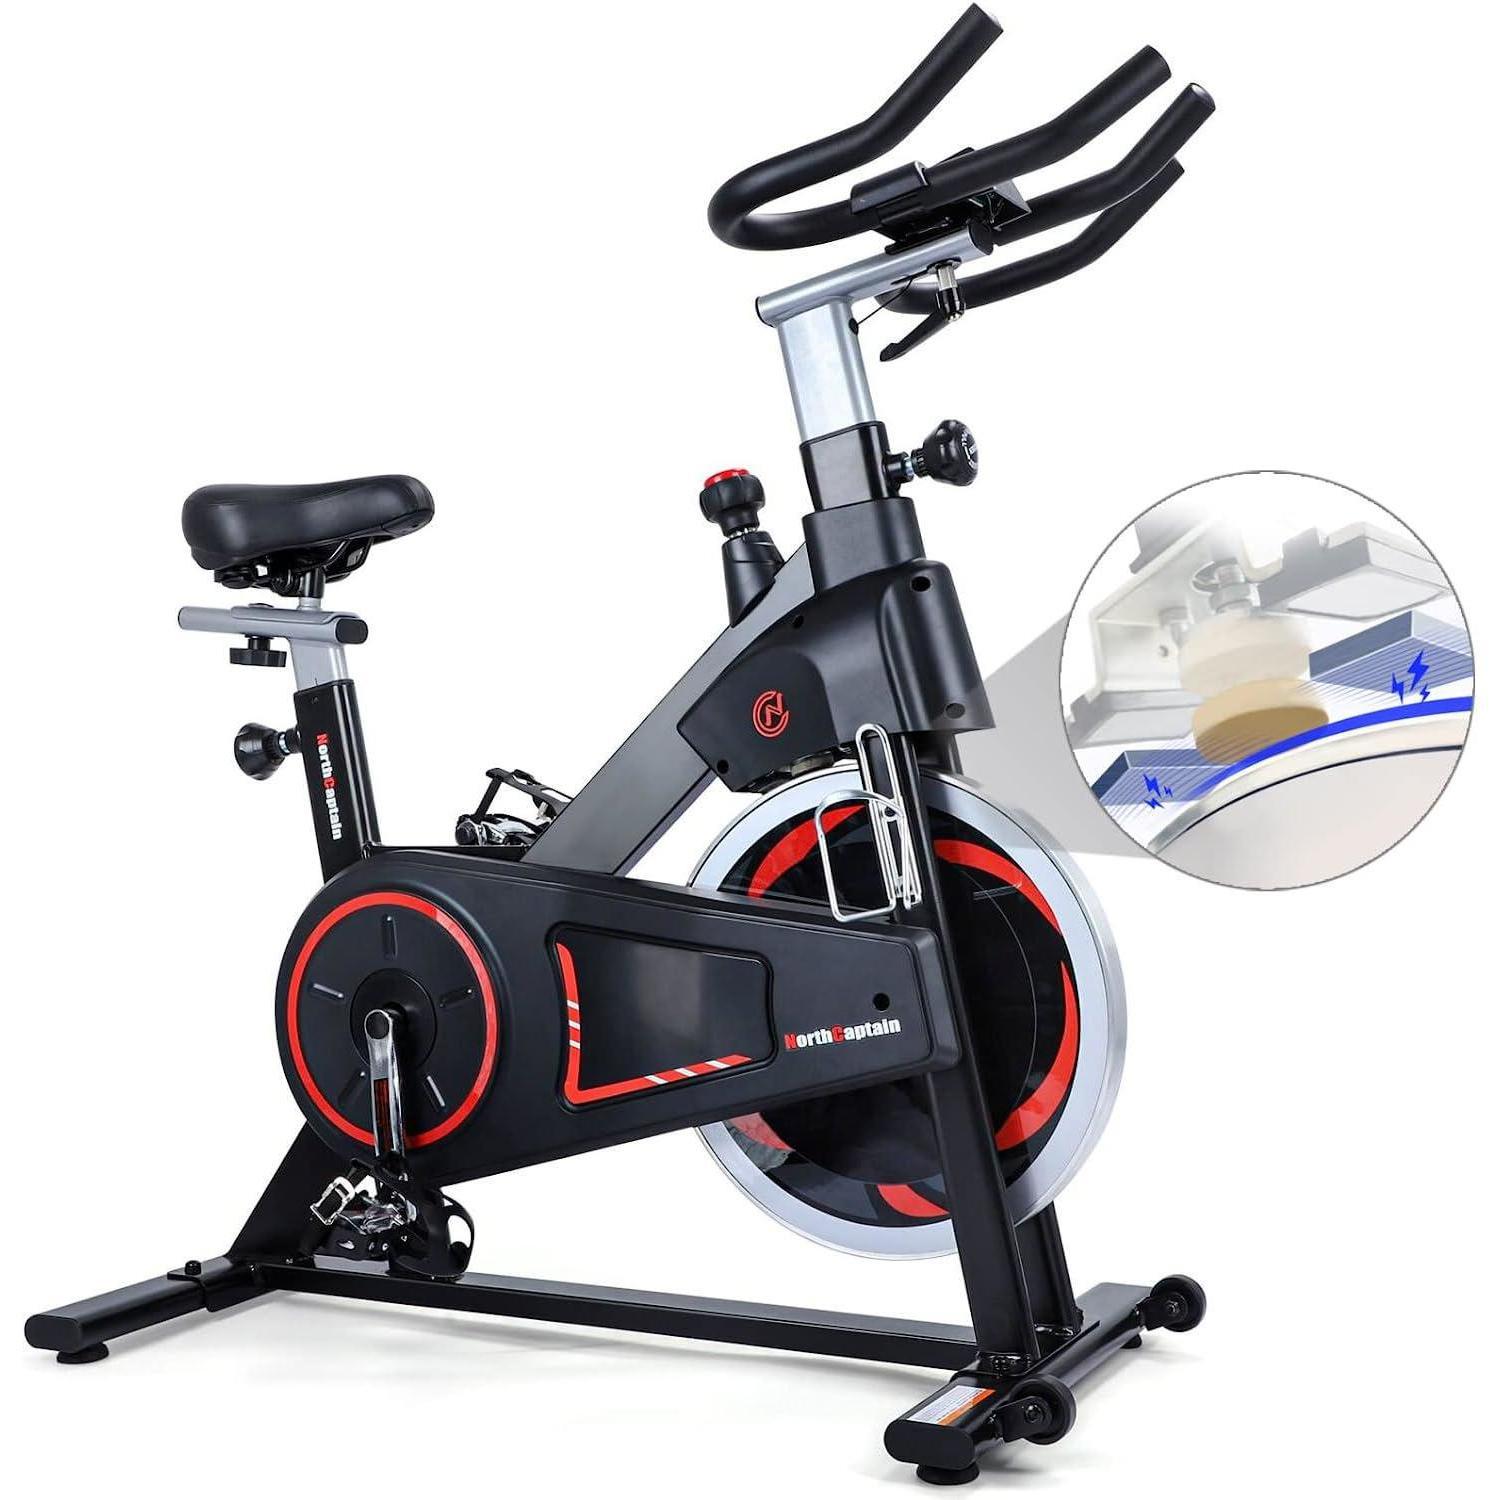 Burn Calories At Home with this Indoor Stationary Bicycle